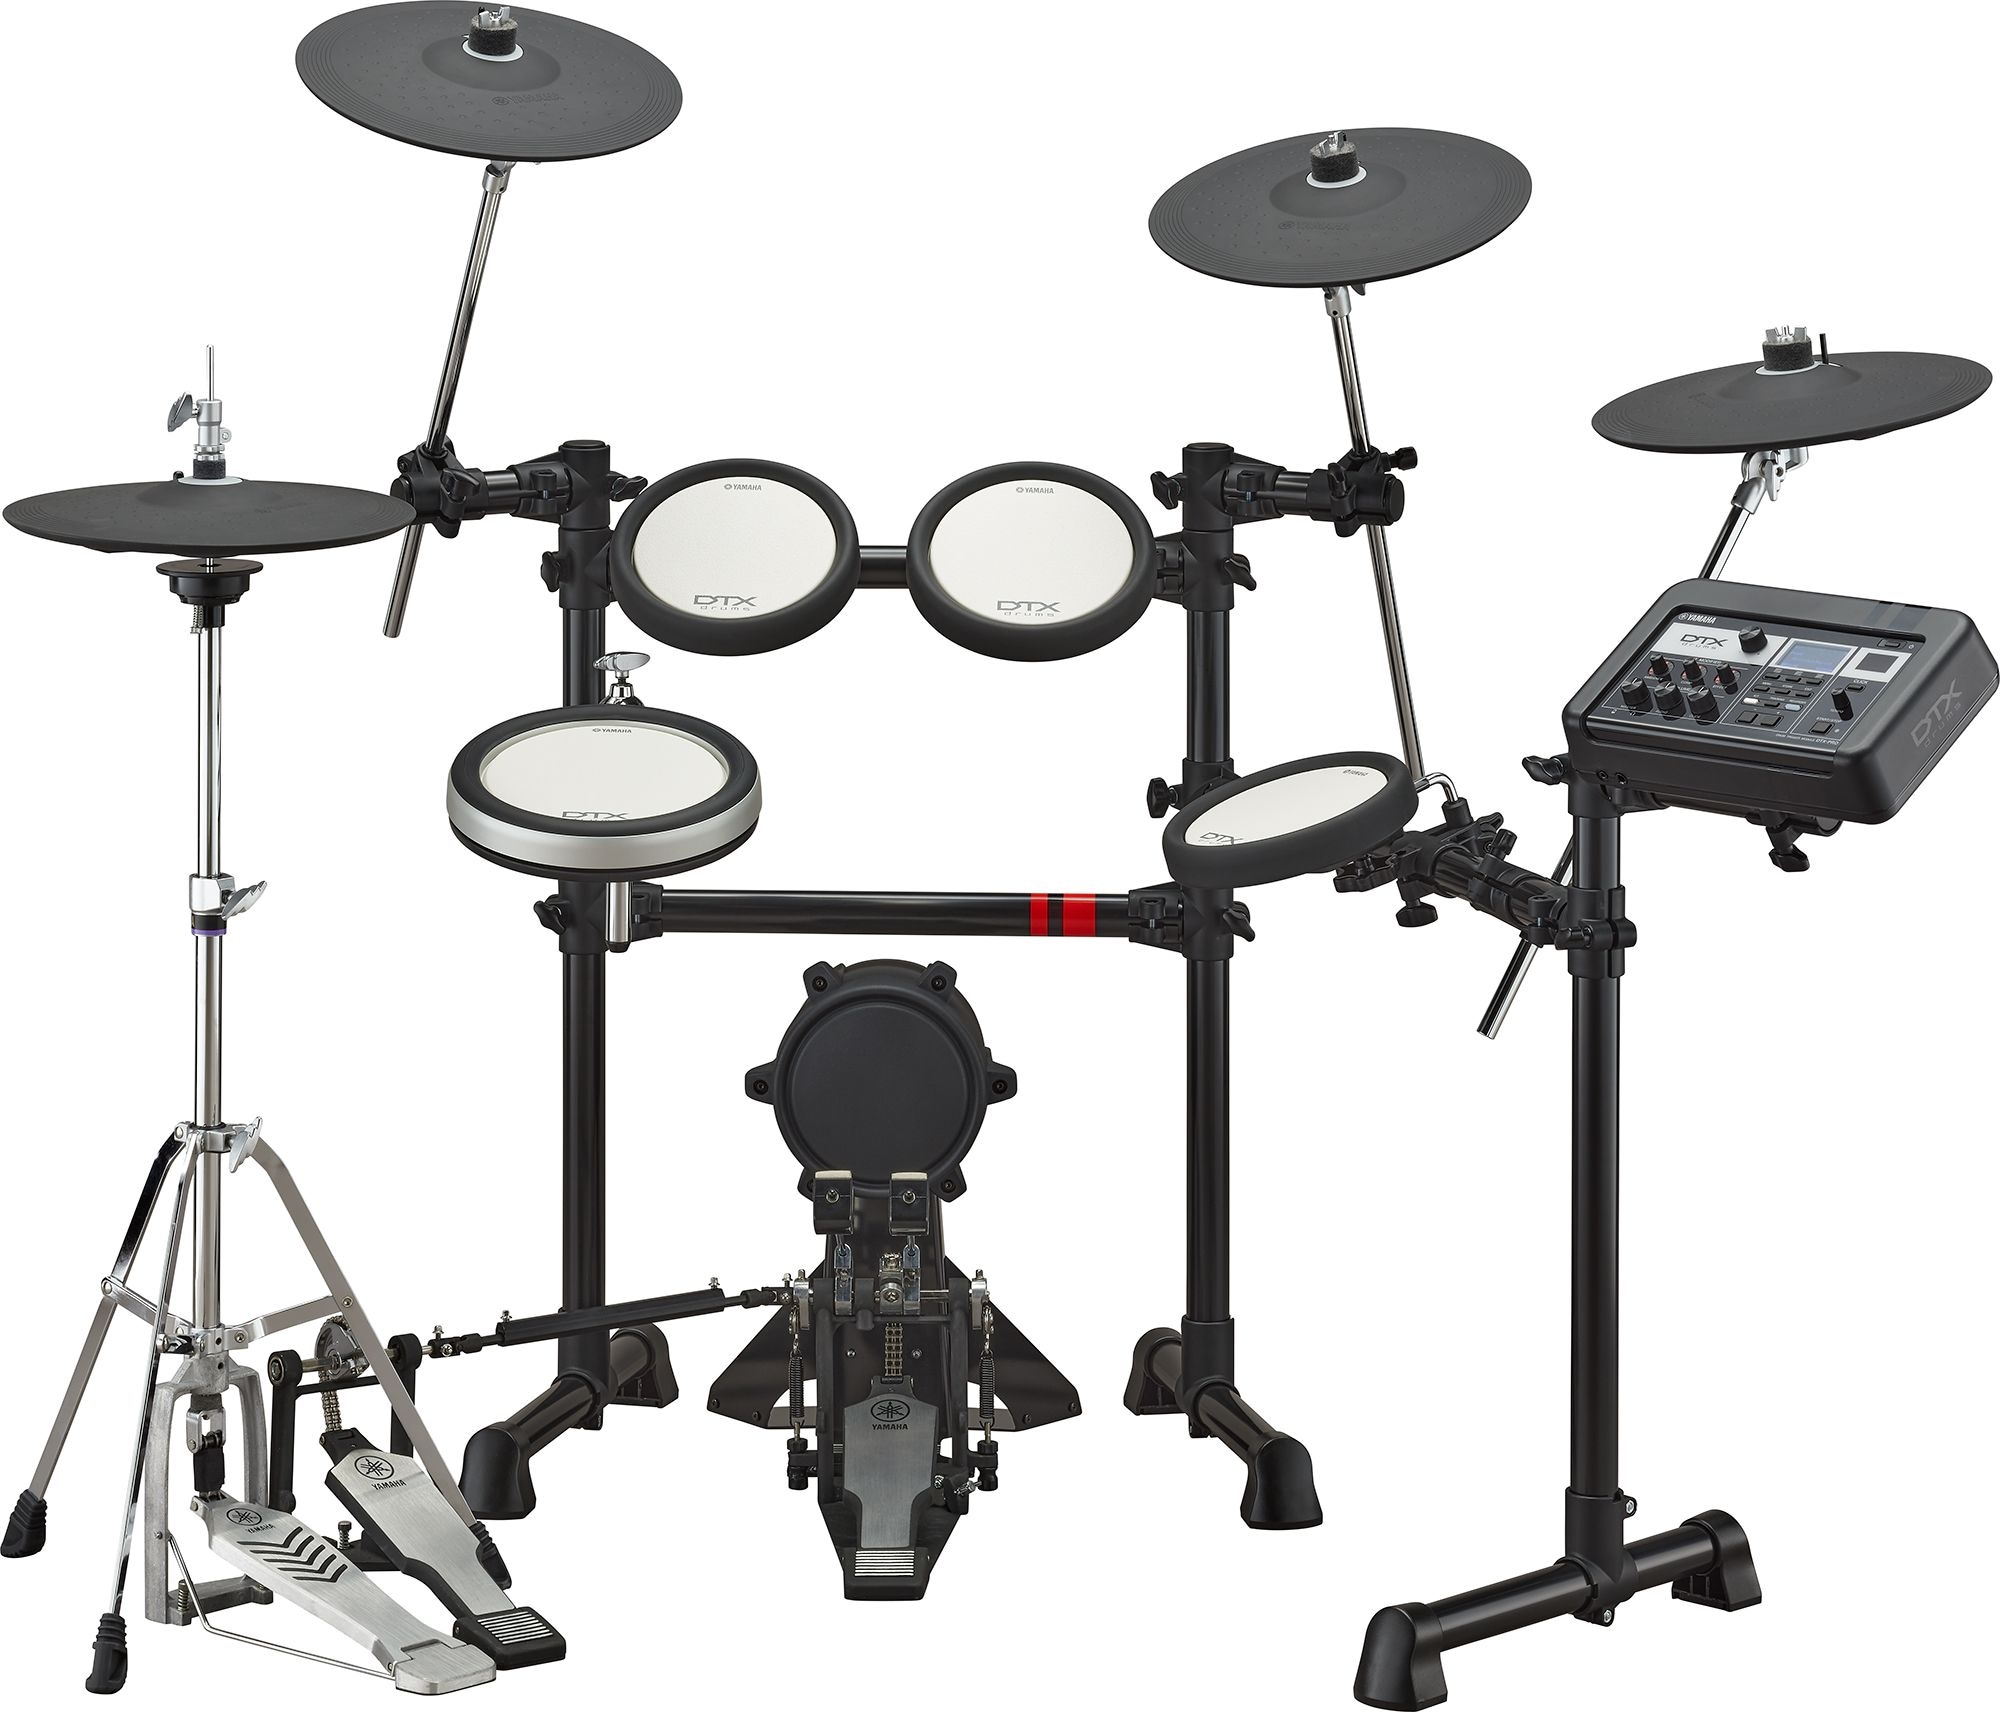 DTX6 Series - Products - Electronic Drum Kits - Electronic Drums - Drums -  Musical Instruments - Products - Yamaha - Africa / Asia / CIS / Latin  America / Middle East / Oceania